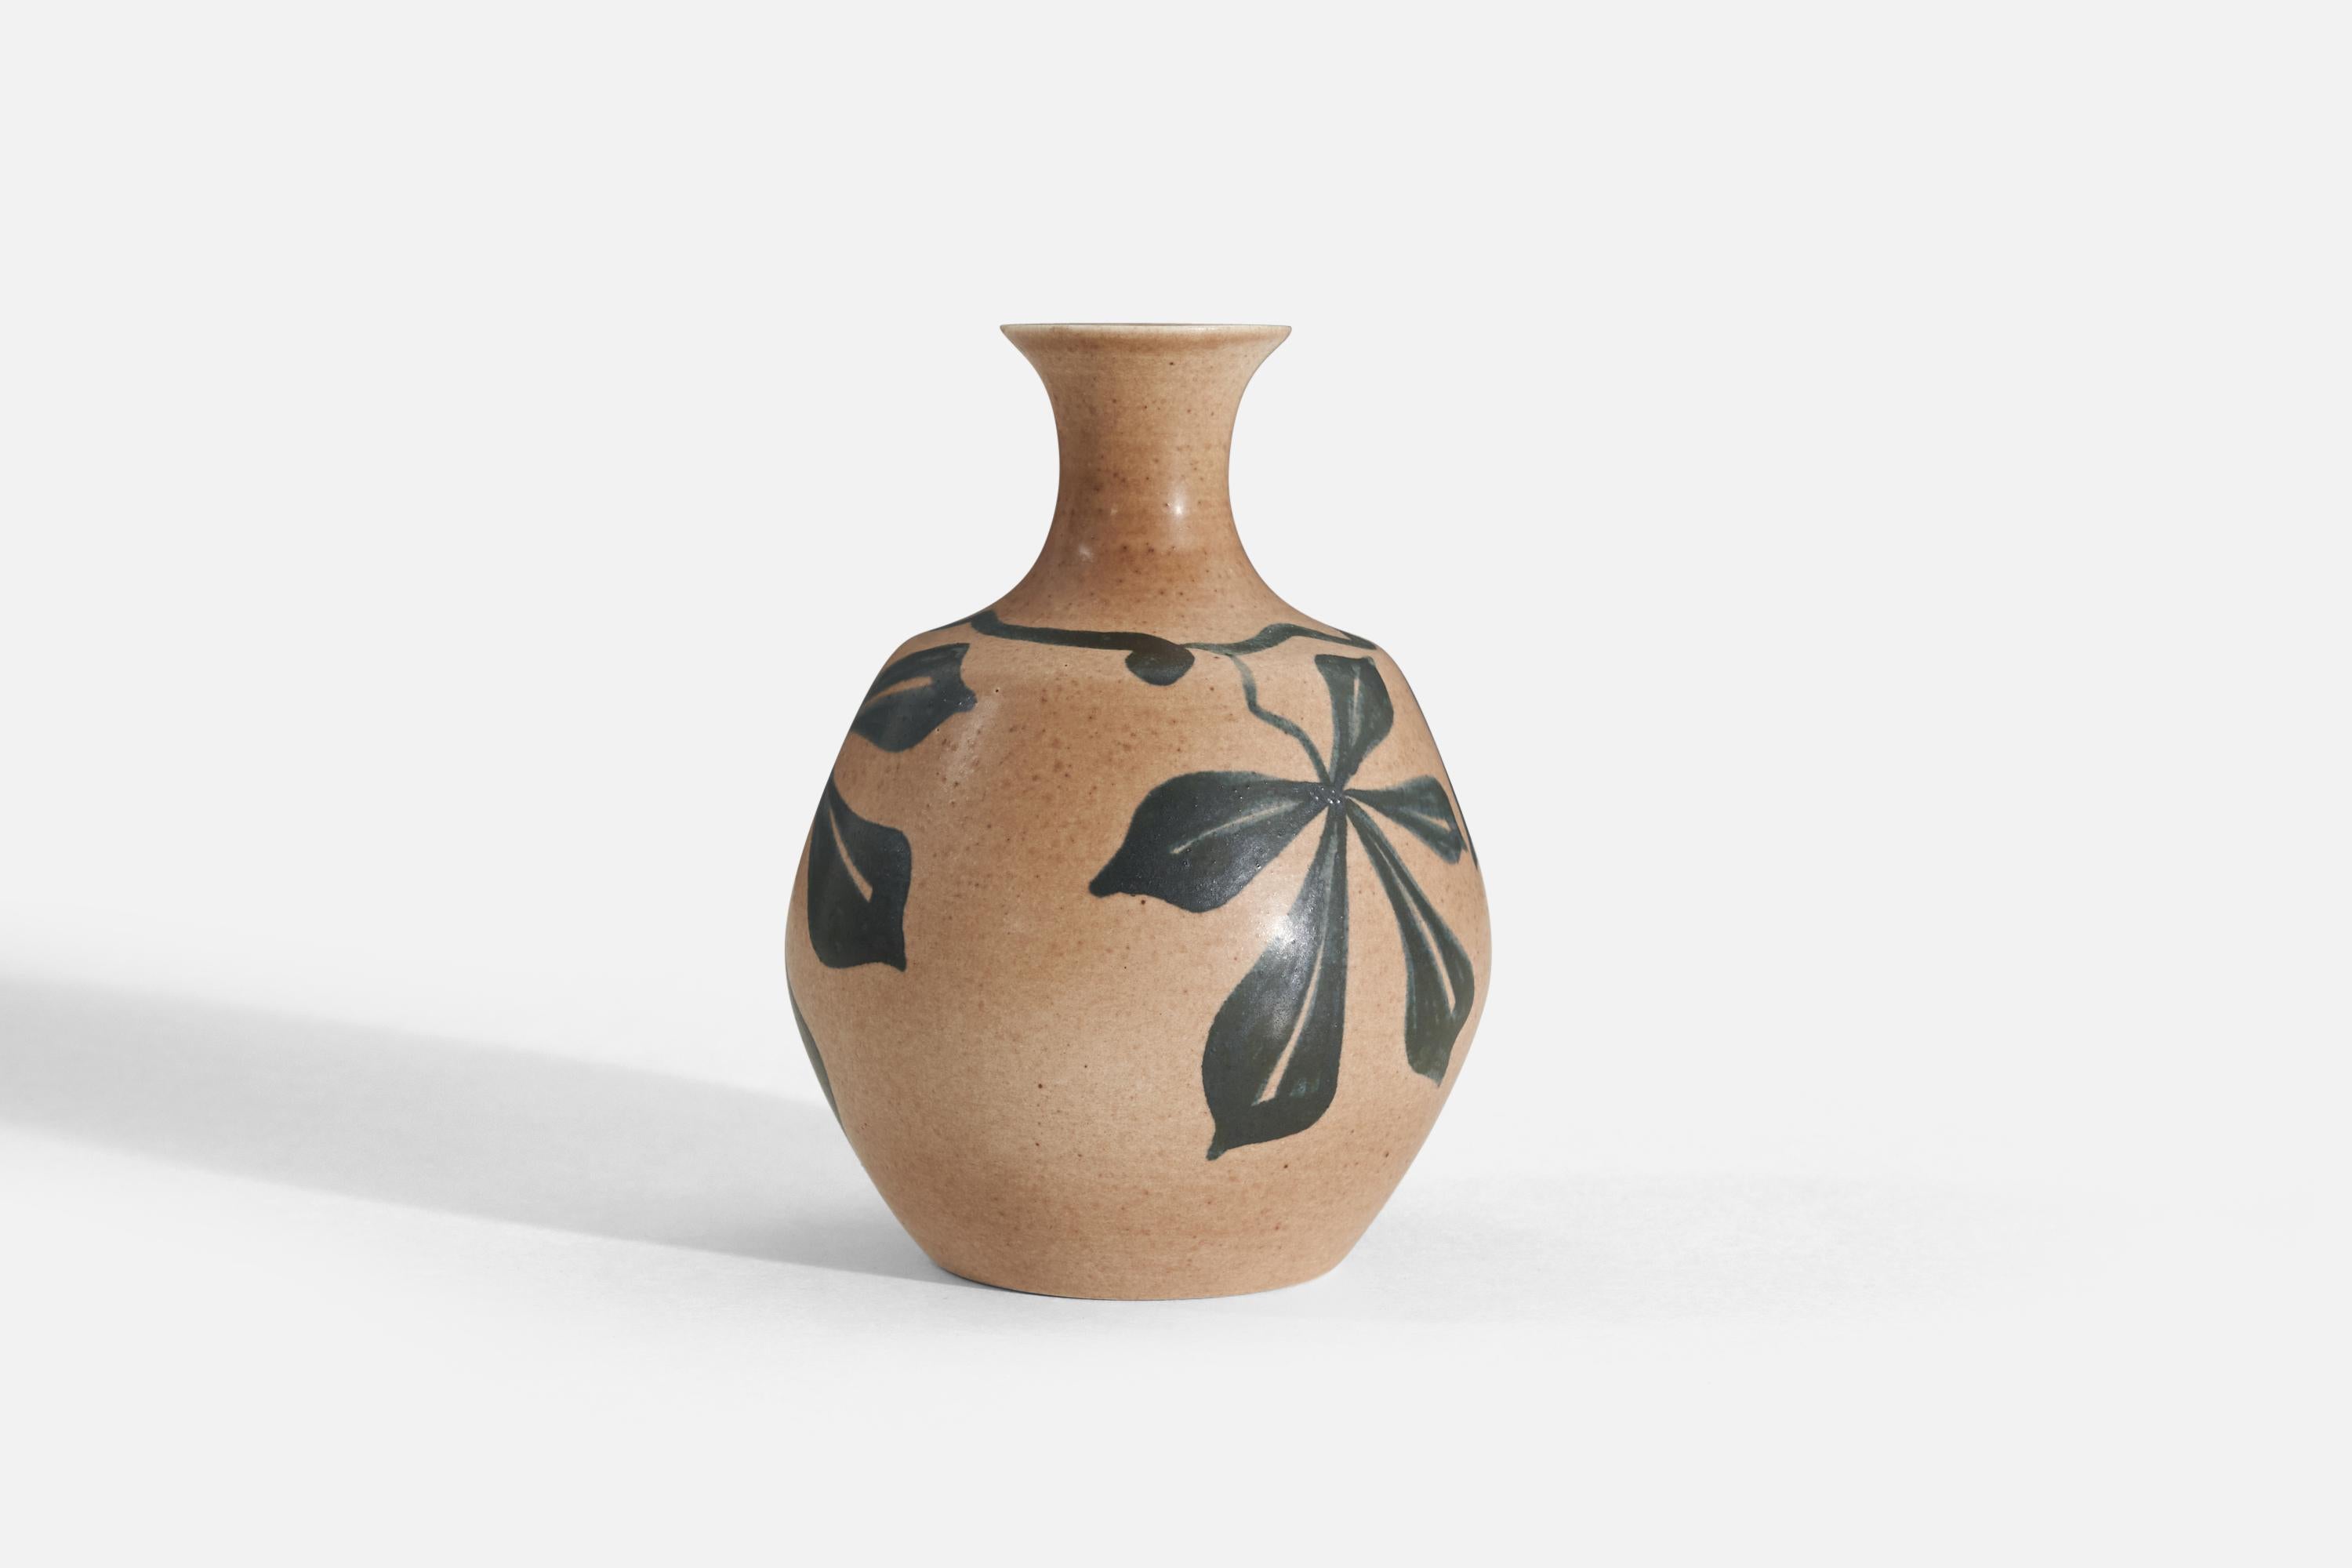 A brown / tan glazed stoneware vase with floral motif designed and produced by Åke Holm, Sweden c. 1960s.